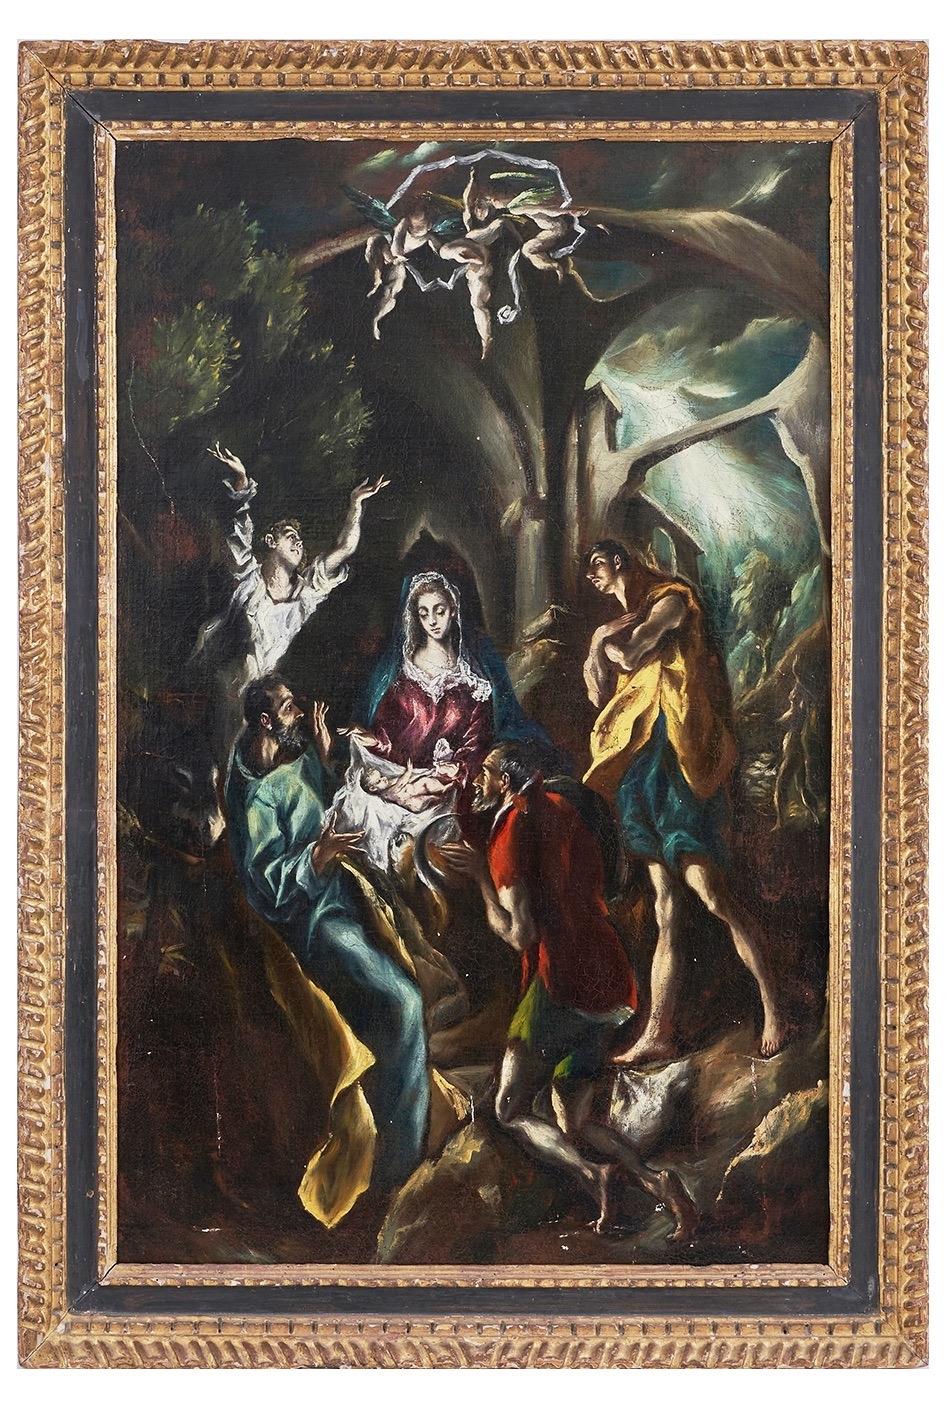 The Adoration of the Shepherds - Painting by Follower of El Greco